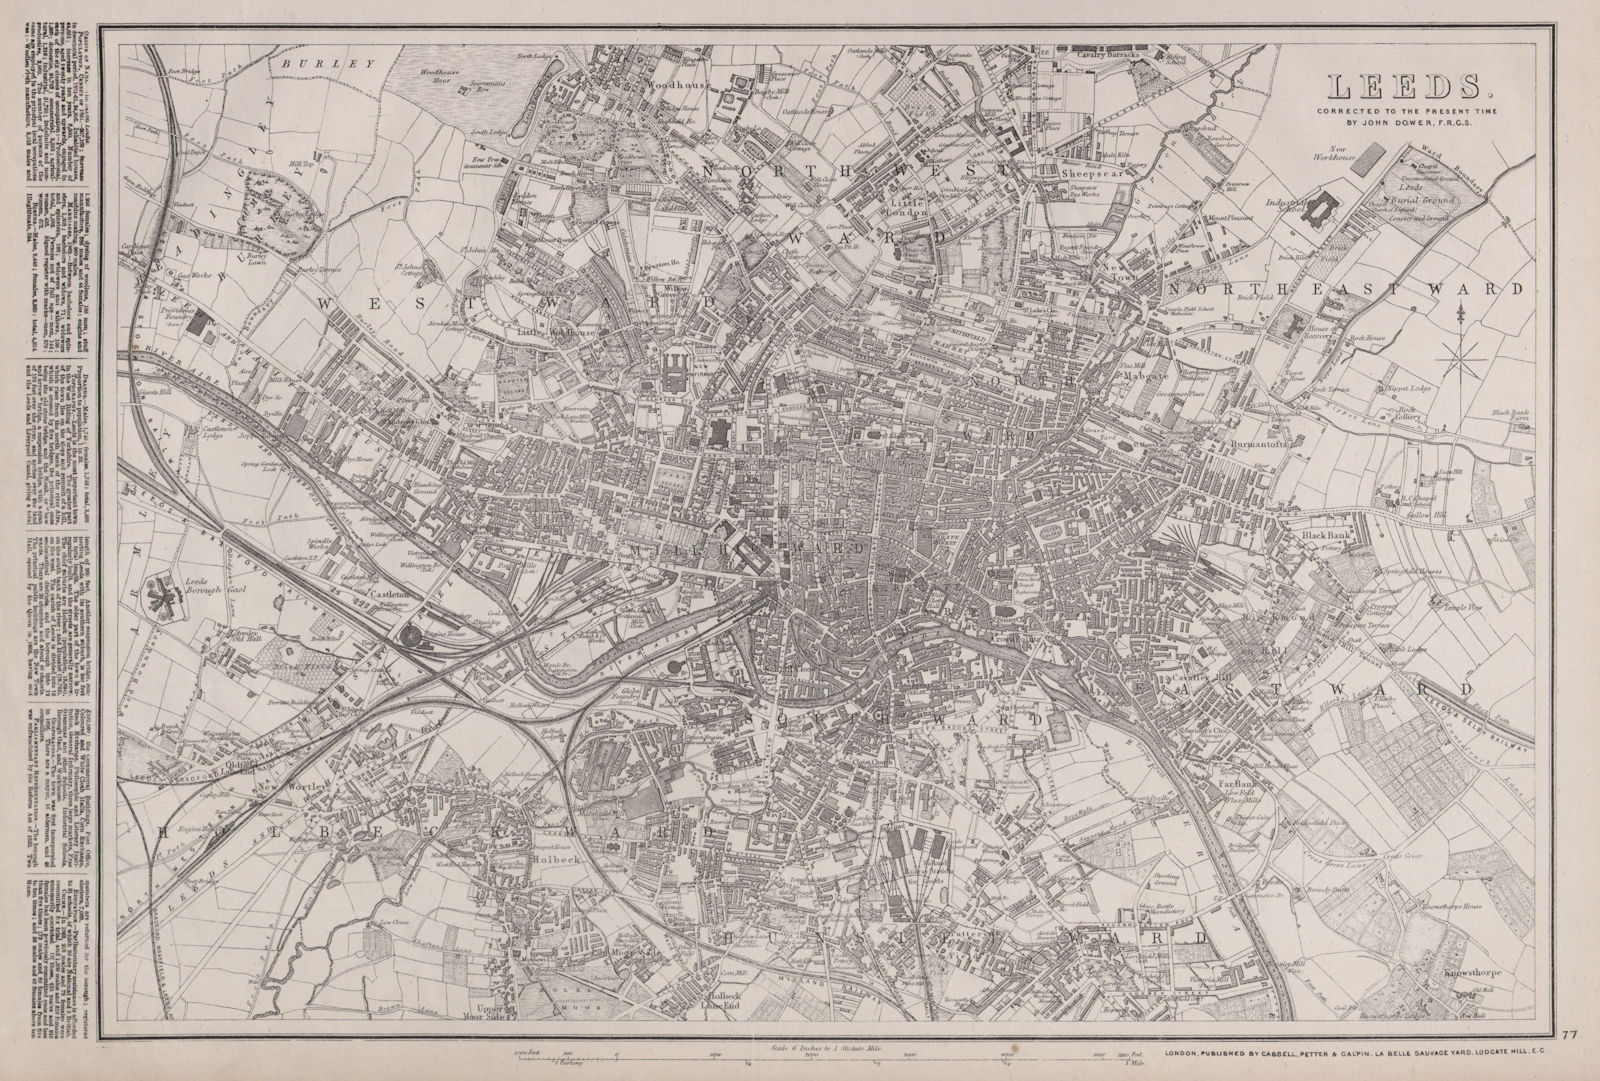 Associate Product LEEDS. Large town/city plan by BR DAVIES for the Dispatch Atlas 1868 old map